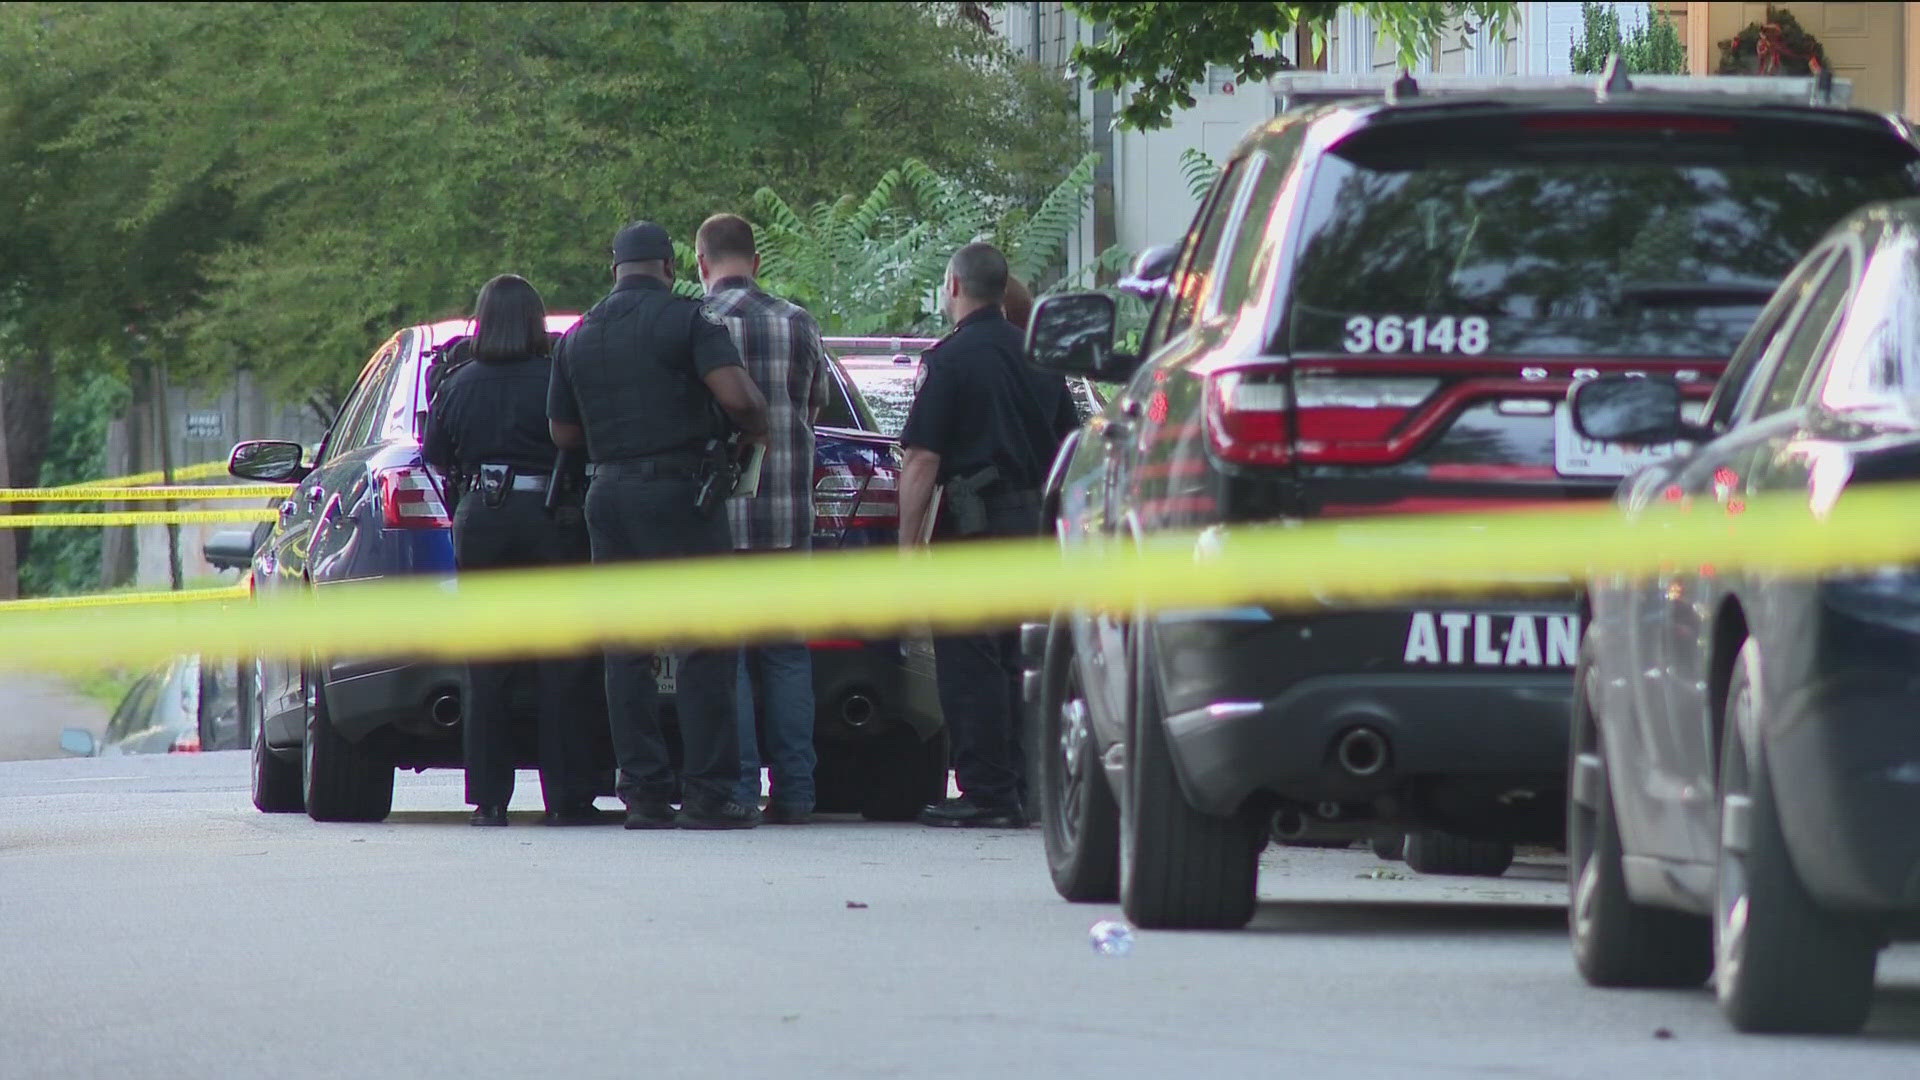 Three police officers were shot in the line of duty, and one suspect was killed Saturday evening in Atlanta's Capitol View neighborhood, APD's chief said.